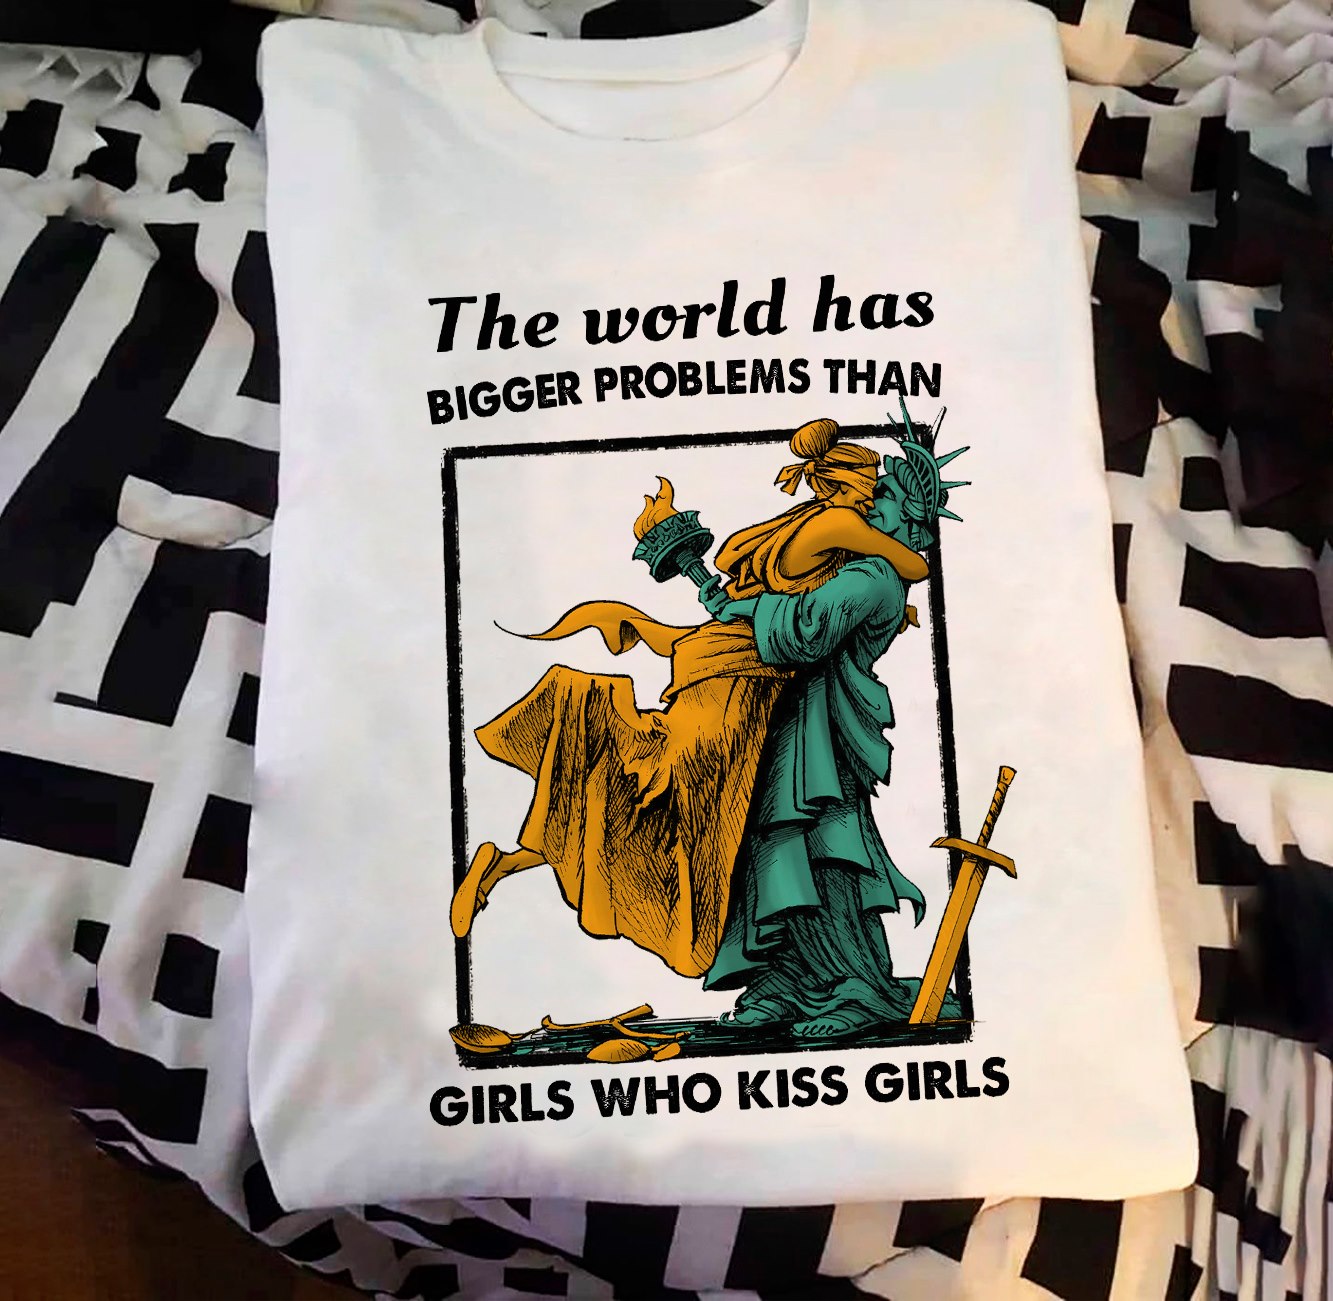 The world has bigger problems than girls who kiss girls - Statue of Liberty